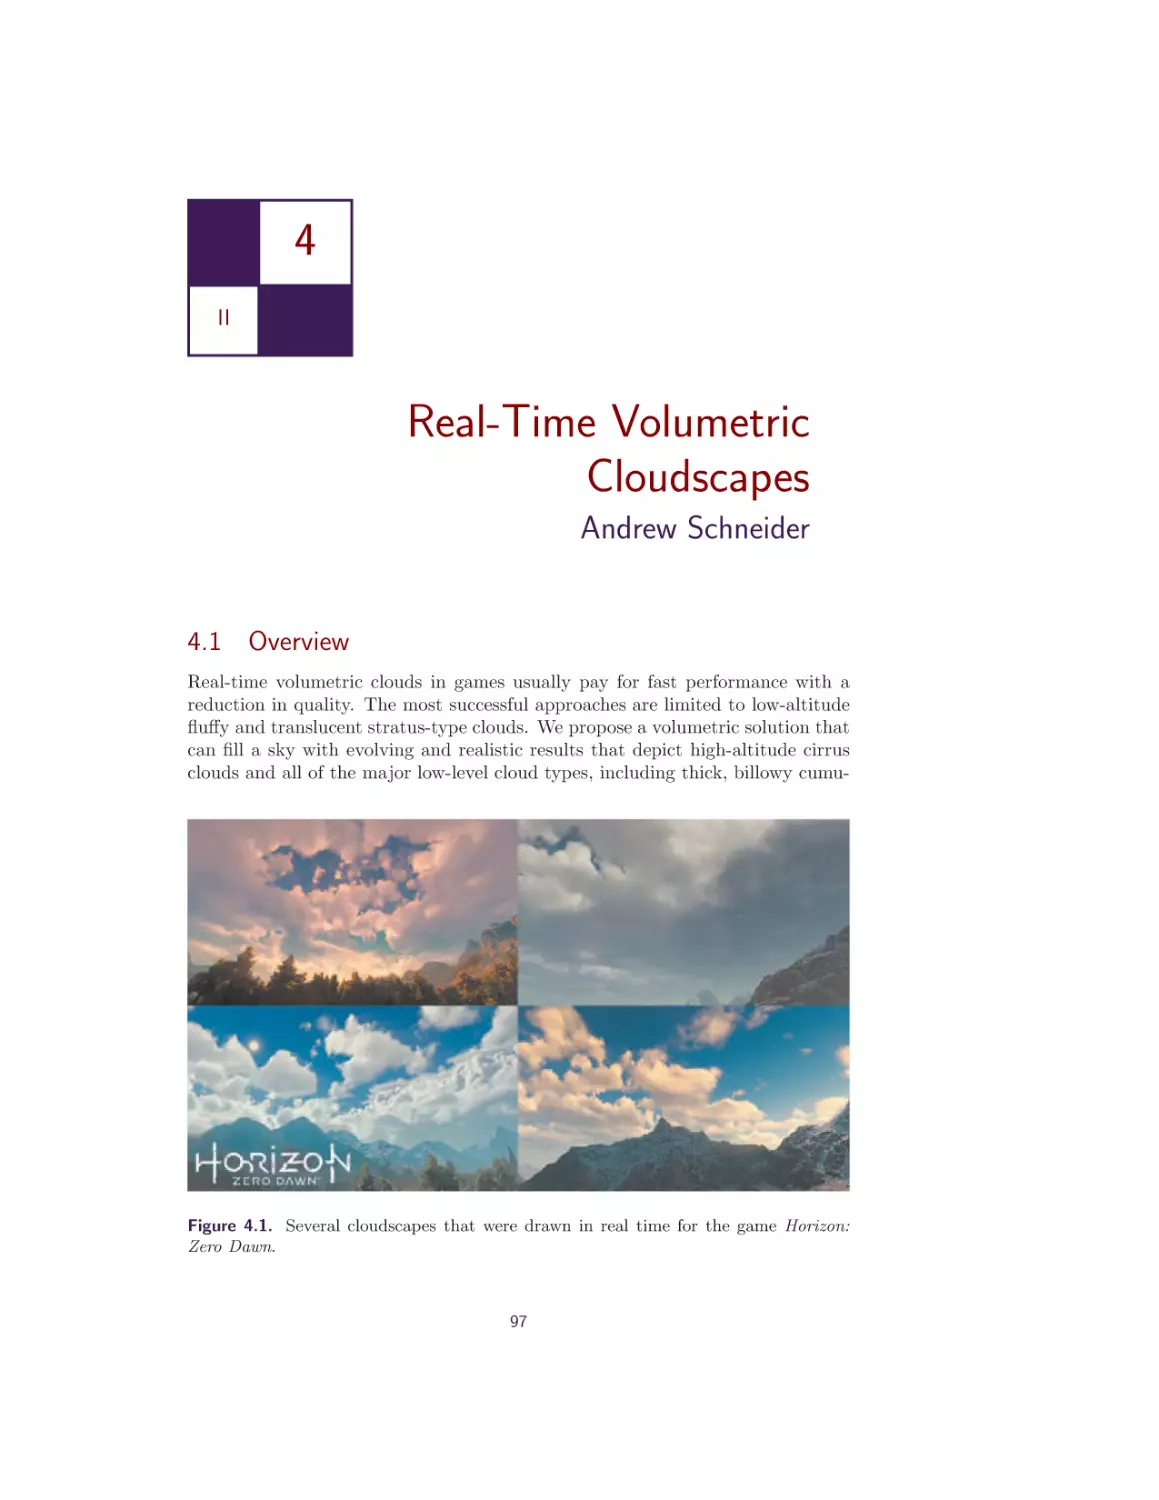 4. Real-Time Volumetric Cloudscapes